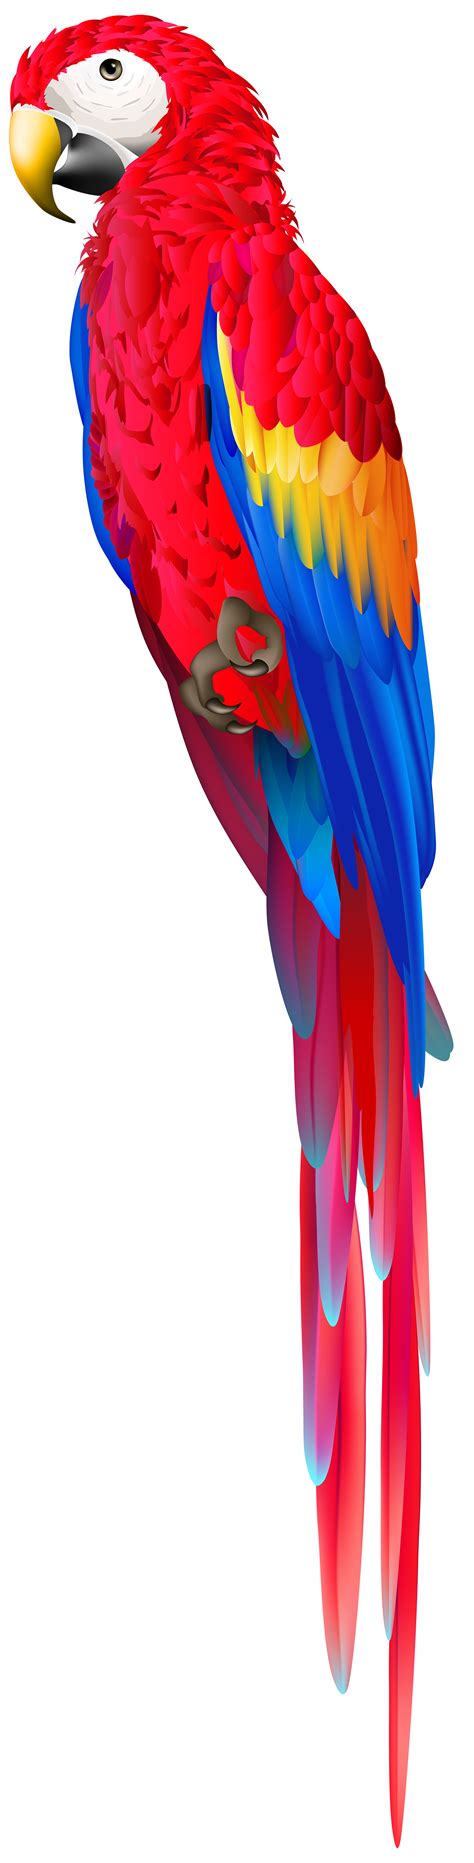 Parrot Clipart Red Parrot Parrot Red Parrot Transparent Free For